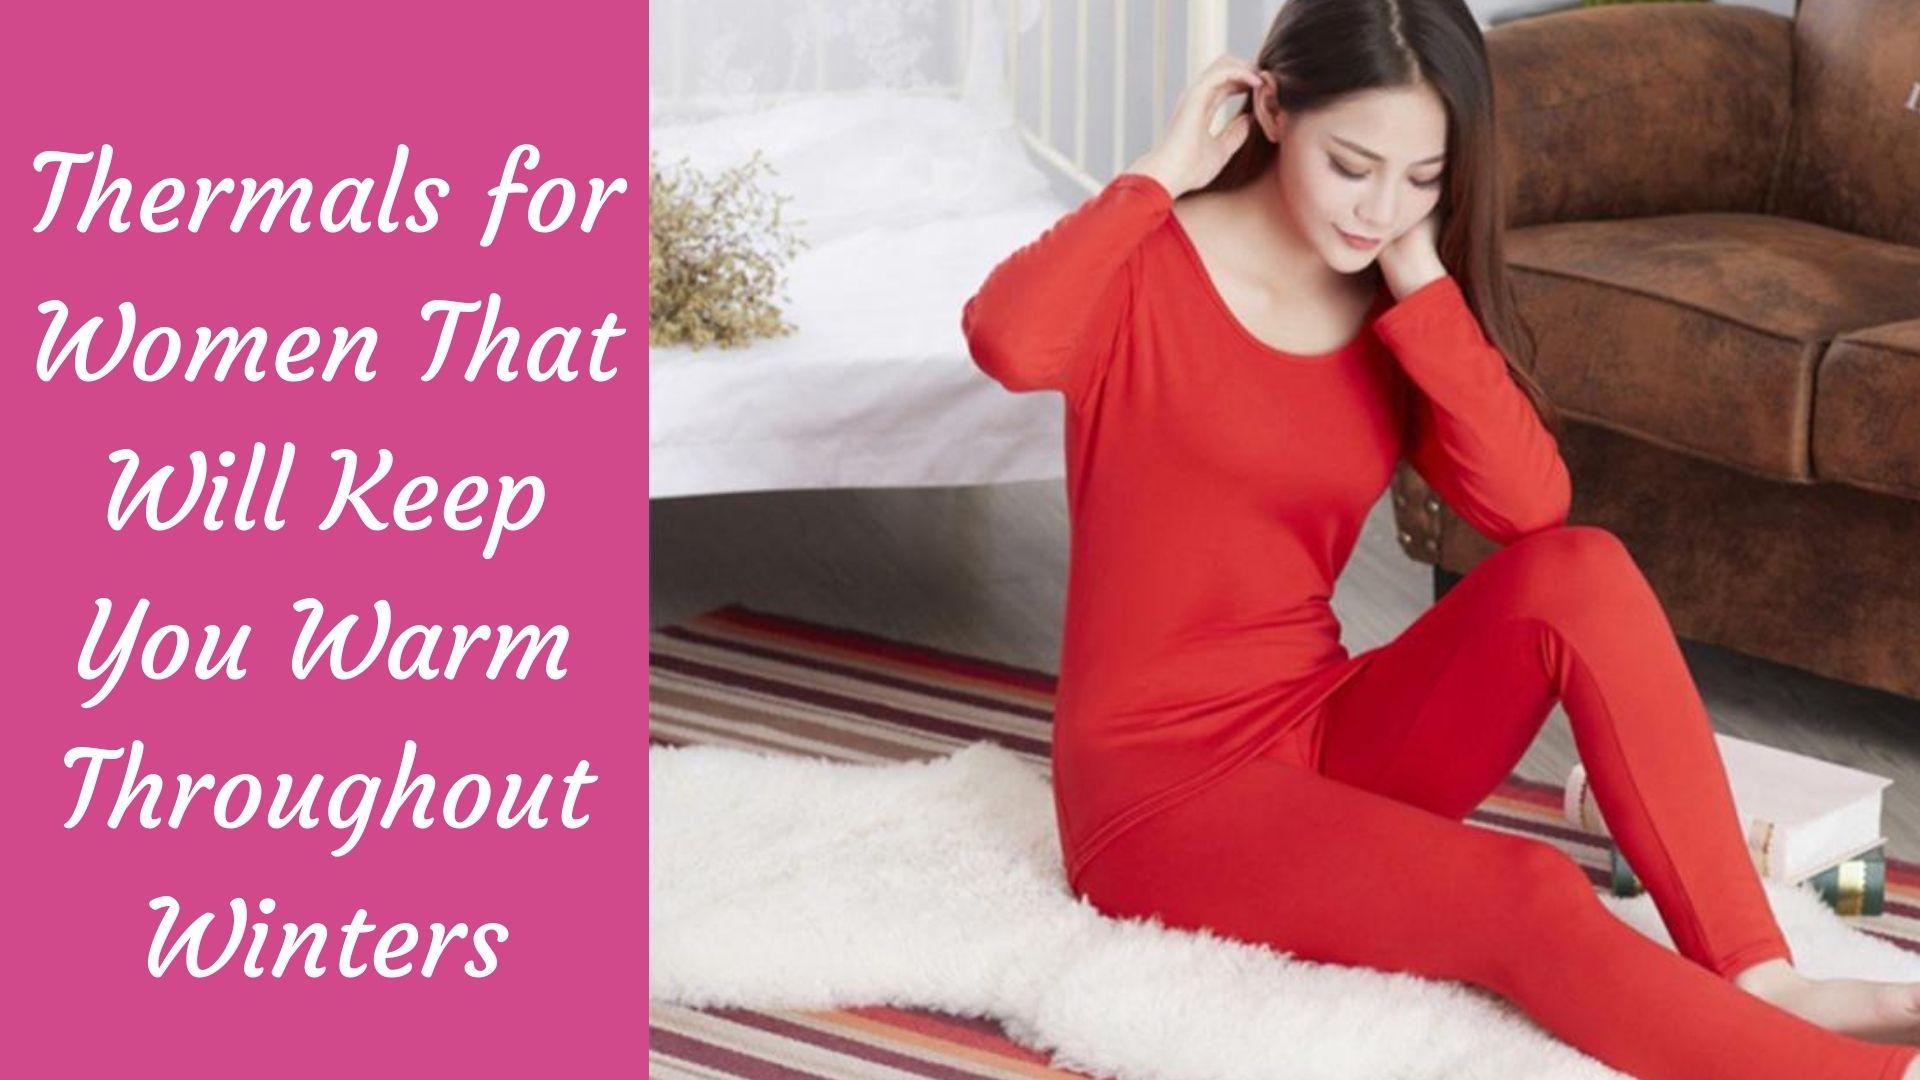 Thermals for Women That Will Keep You Warm Throughout Winters